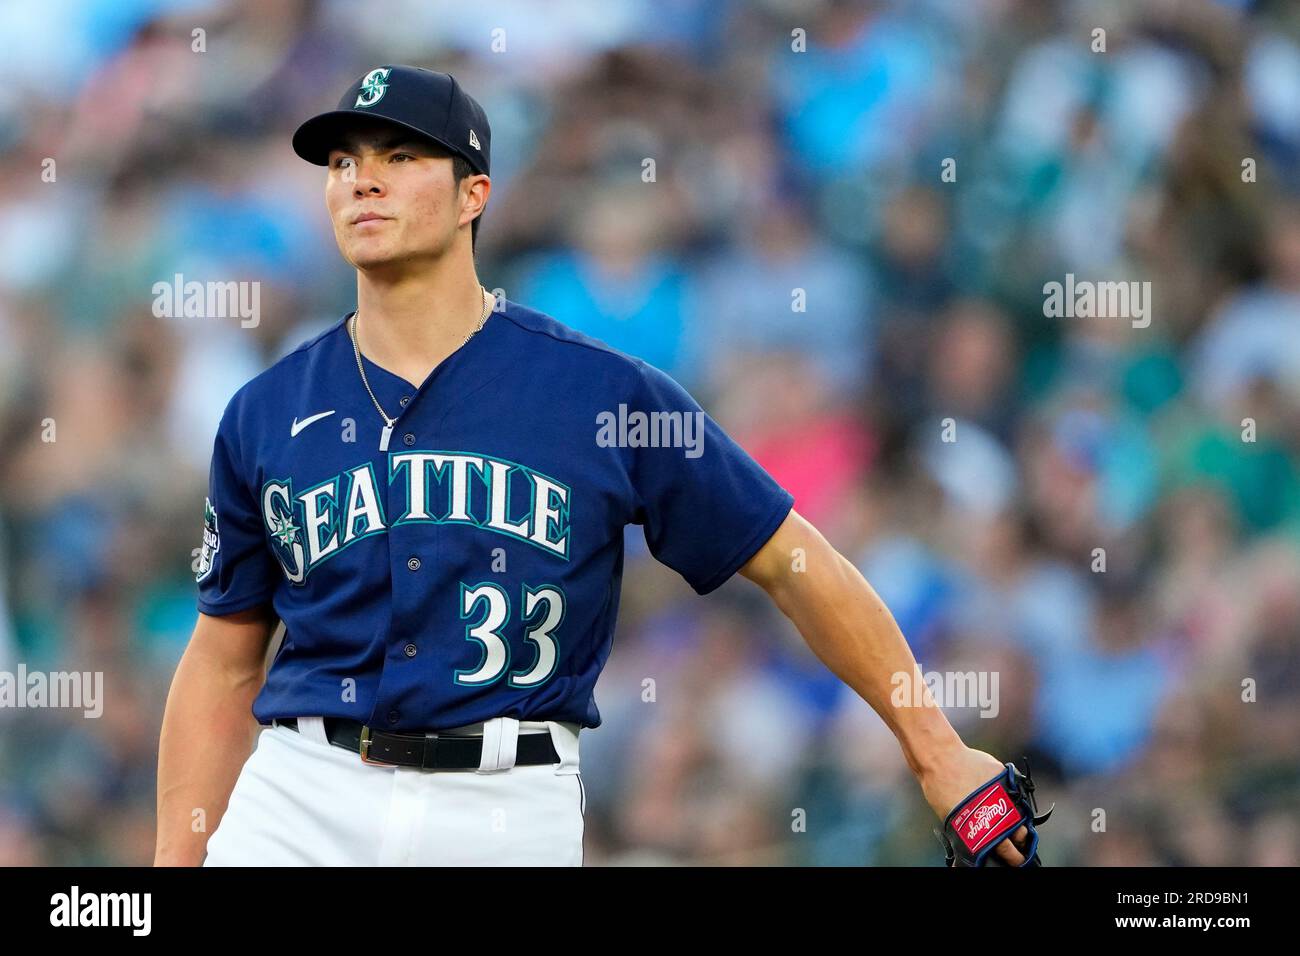 Seattle Mariners starting pitcher Bryan Woo reacts after giving up a